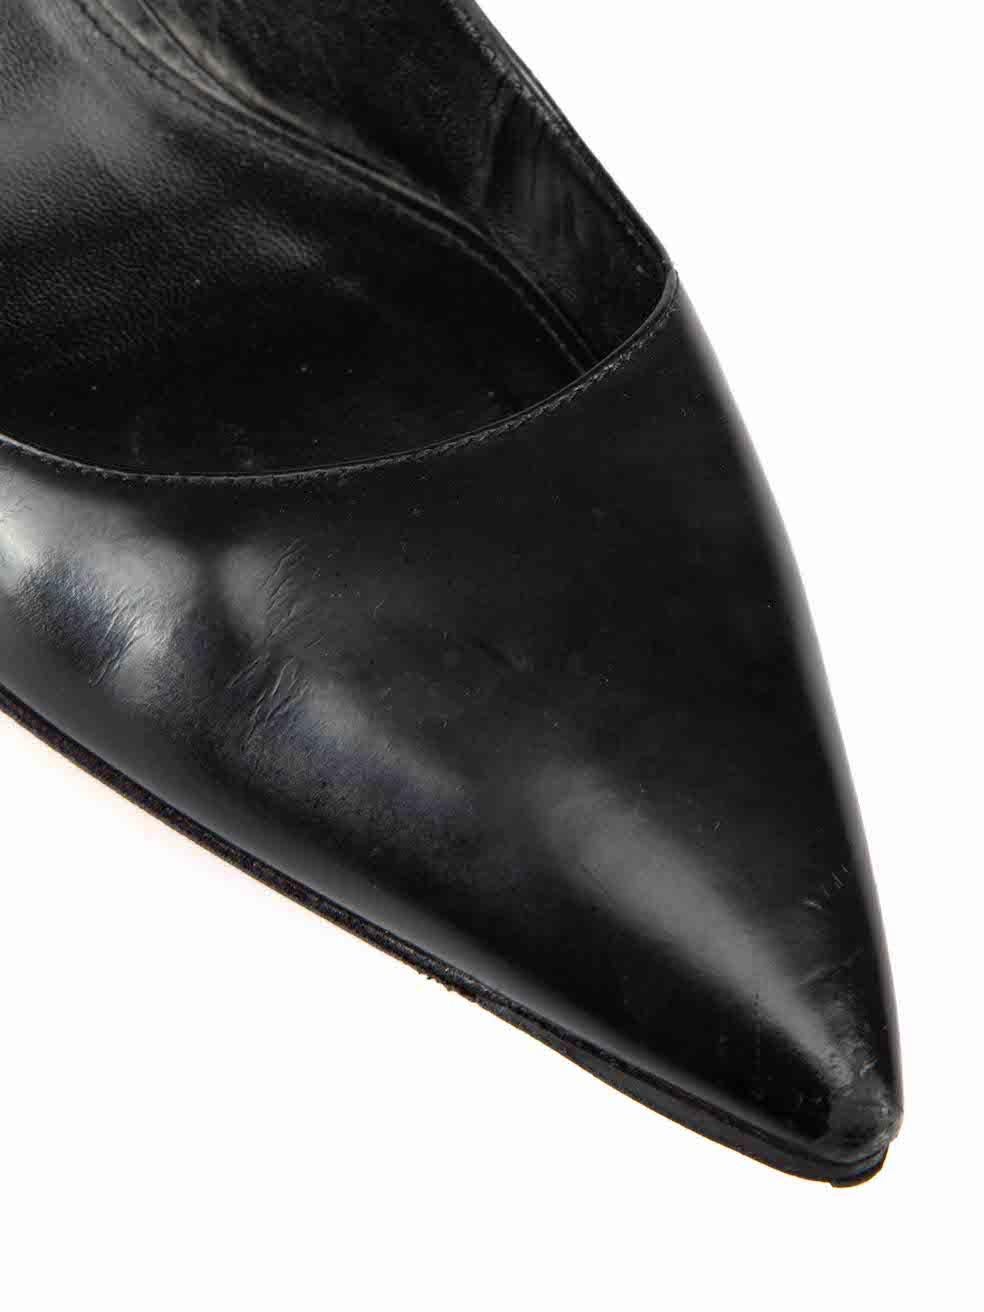 Prada Black Leather Point Toe Court Shoes Size IT 40.5 For Sale 1